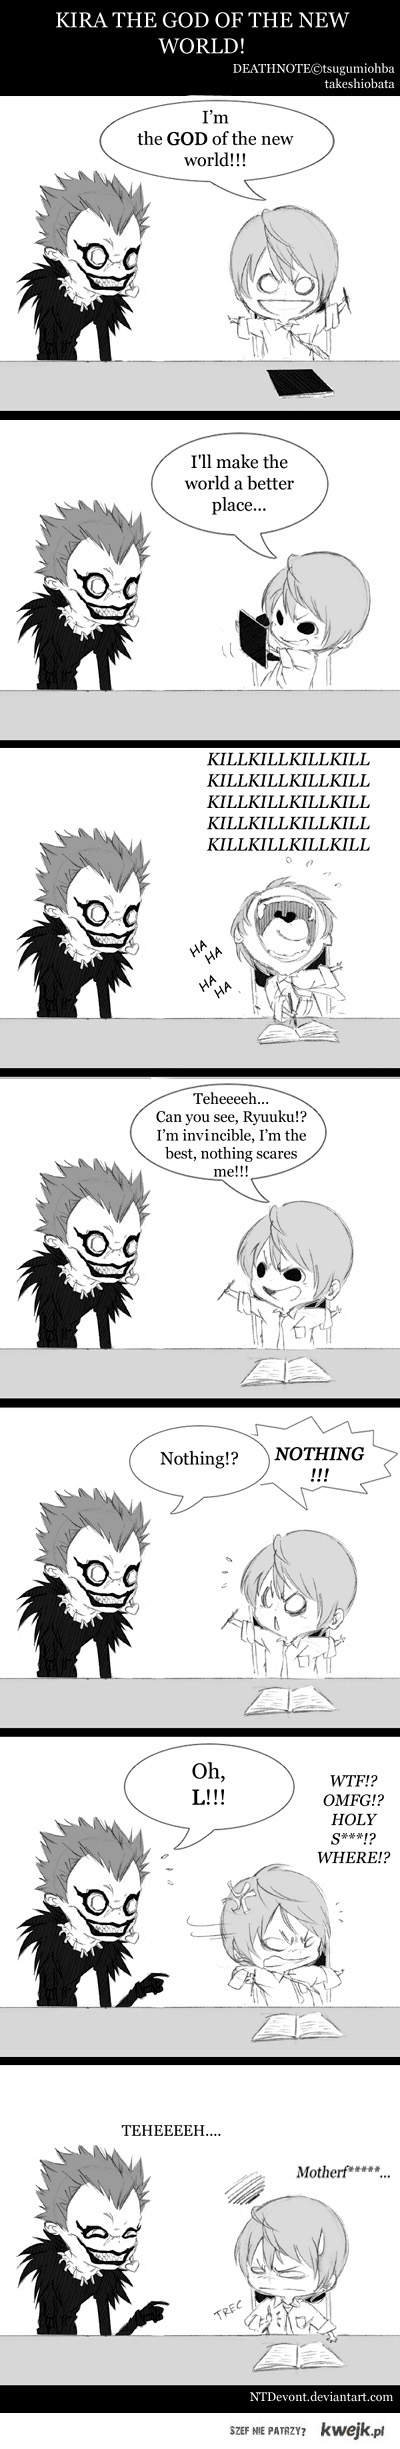 Death Note.